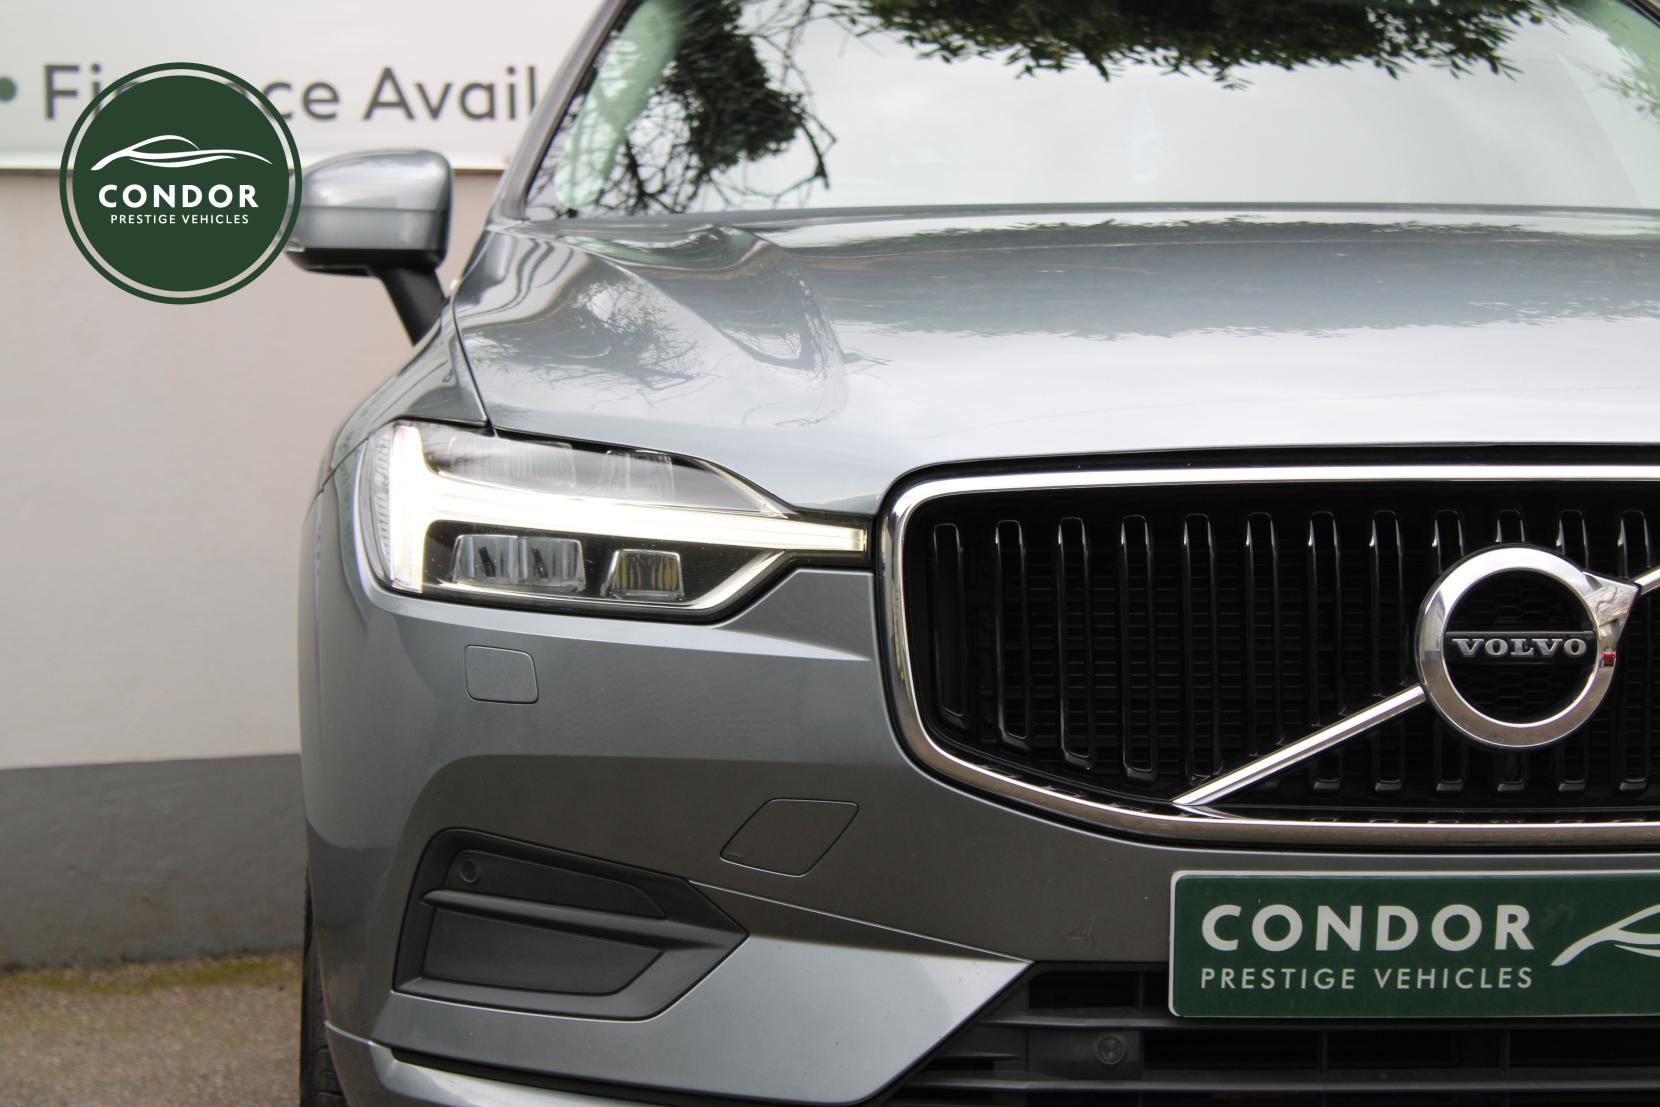 Volvo XC60 2.0 D4 Momentum SUV 5dr Diesel Manual AWD Euro 6 (s/s) (190 ps)